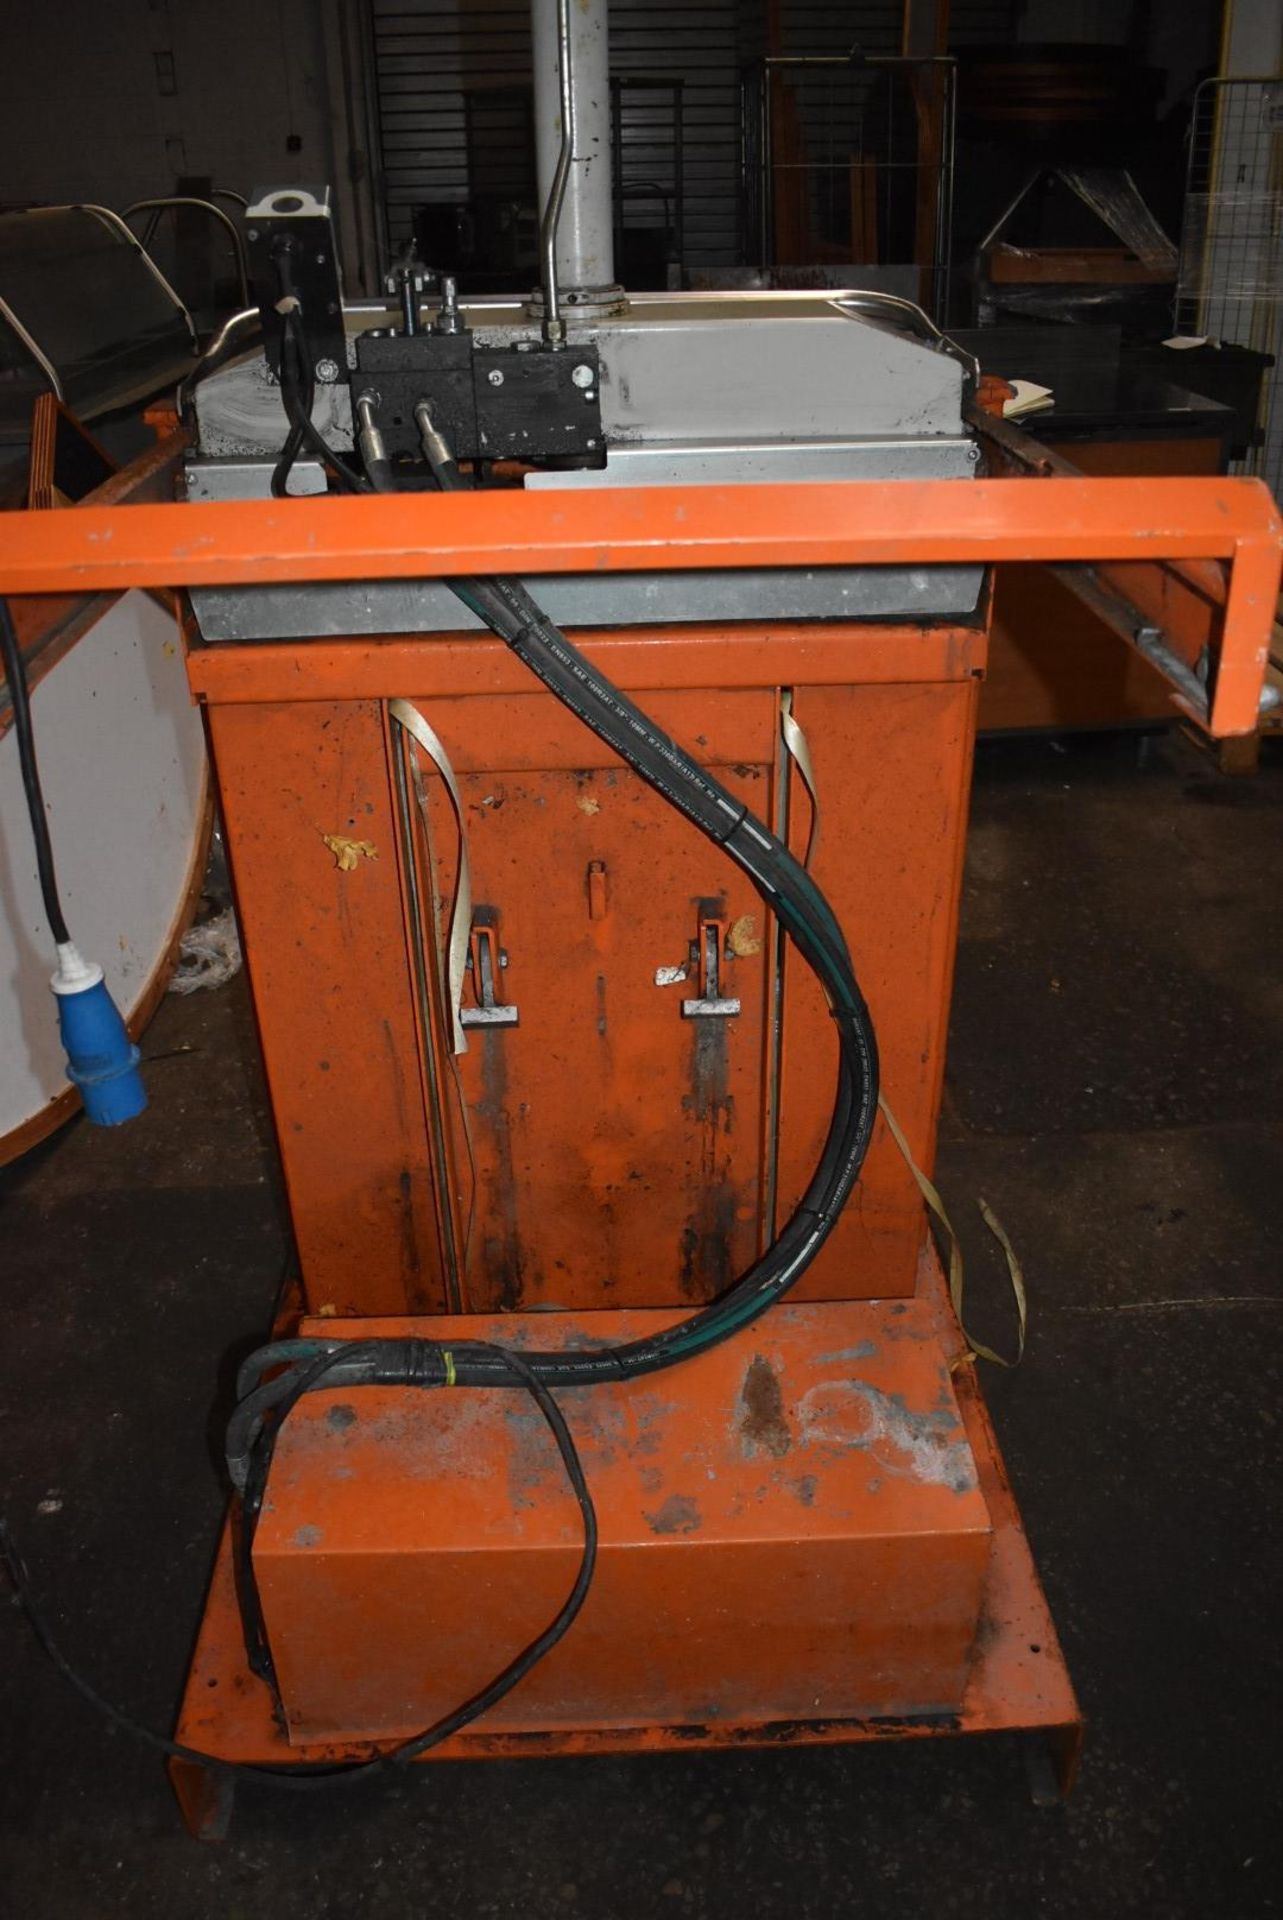 1 x Orwak 5010 Hydraulic Press Compact Cardboard Baler - Used For Compacting Recyclable or Non- - Image 13 of 15